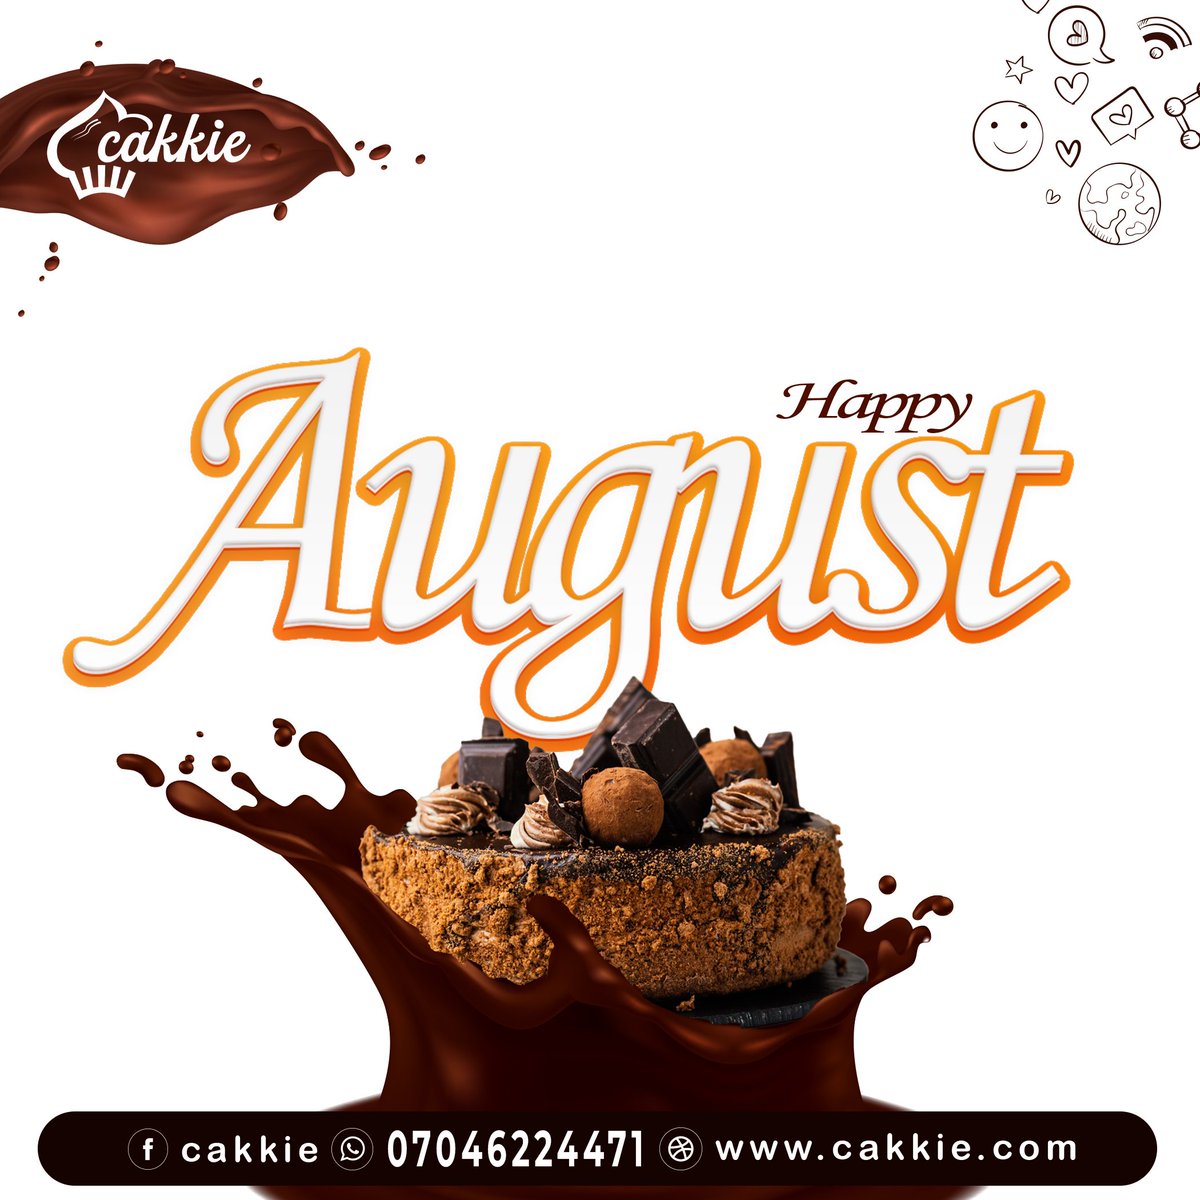 🍰🌞 Start this sweet new month with a slice of joy! 🌞🍰

Wishing you a delectable August filled with cake delights! 🎂🍬 Indulge in mouthwatering treats and explore a world of flavors on Cakkie

#Cakkie #AugustDelights #TreatYourself #CakeLovers #ComingSoon #SweetSurprises